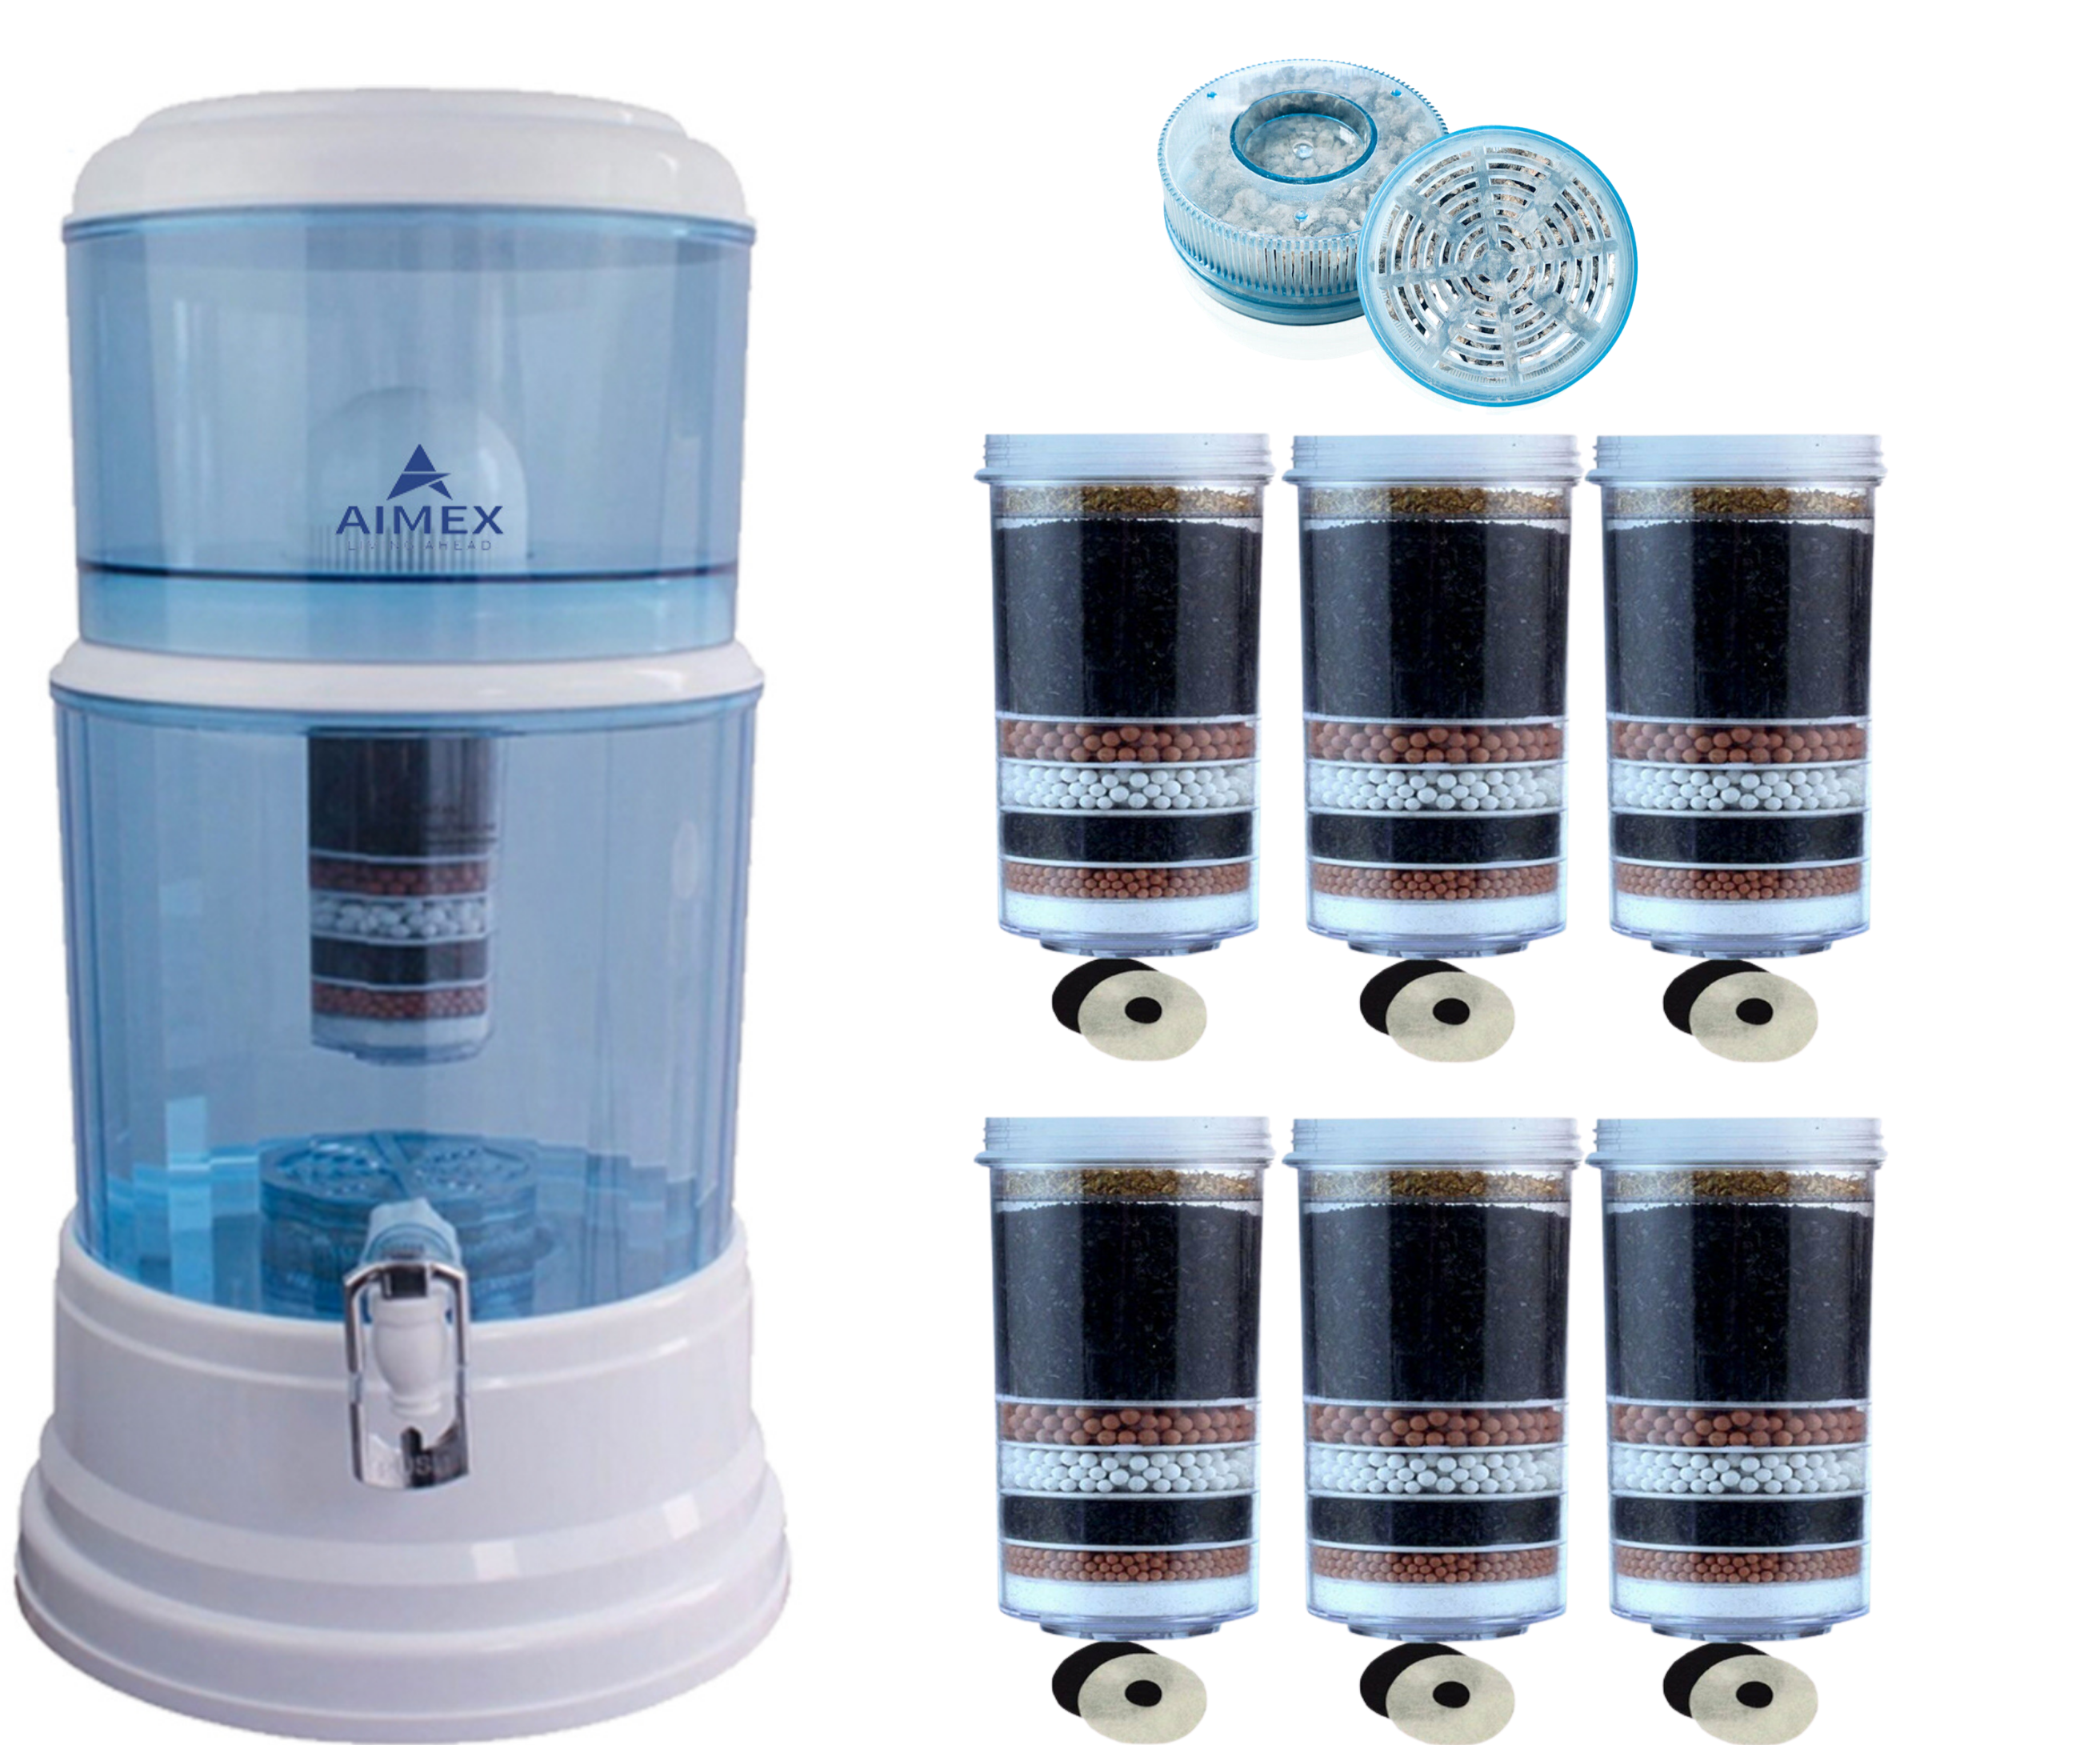 AIMEX WATER DISPENSER 20L BENCHTOP PURIFIER WITH 6 x 8 STAGE WATER FILTERS